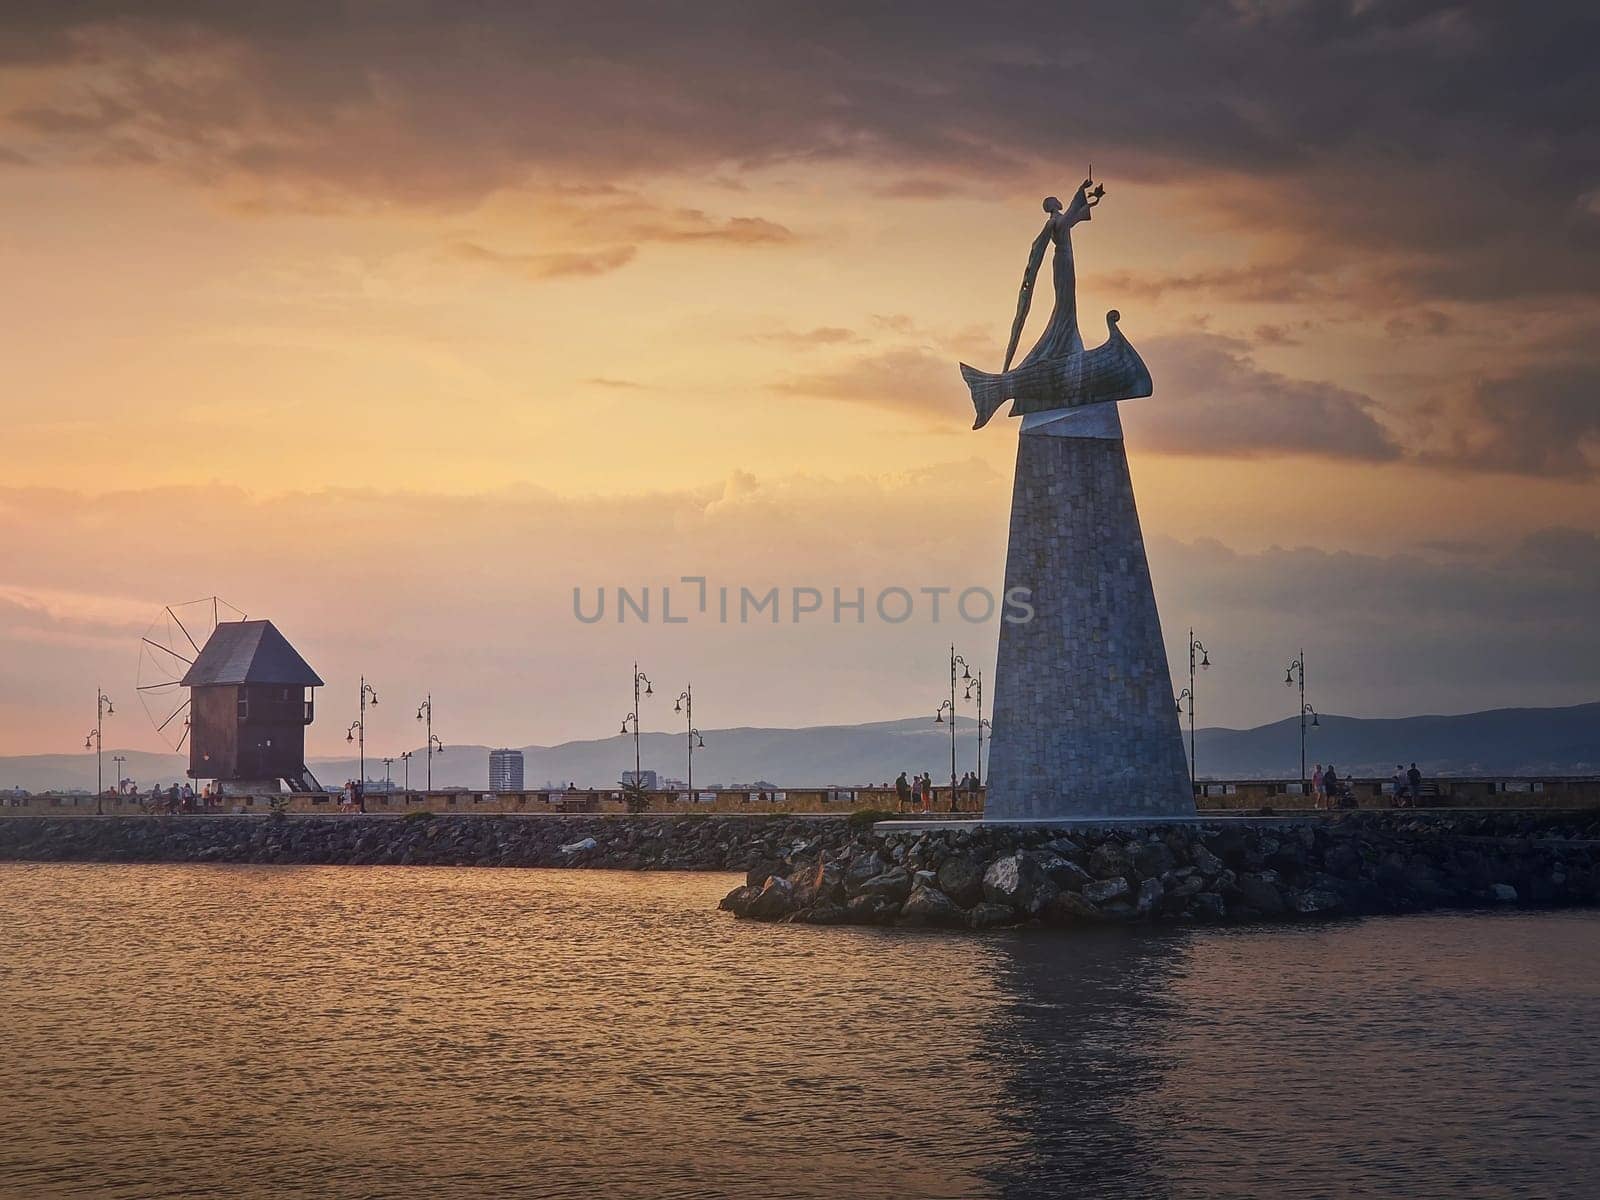 Statue of Saint Nicholas the patron of sailors, in the old town of Nessebar, Burgas, Bulgaria. Sunset scene at the coastline with a beautiful view to the big monument and the mill near the harbor